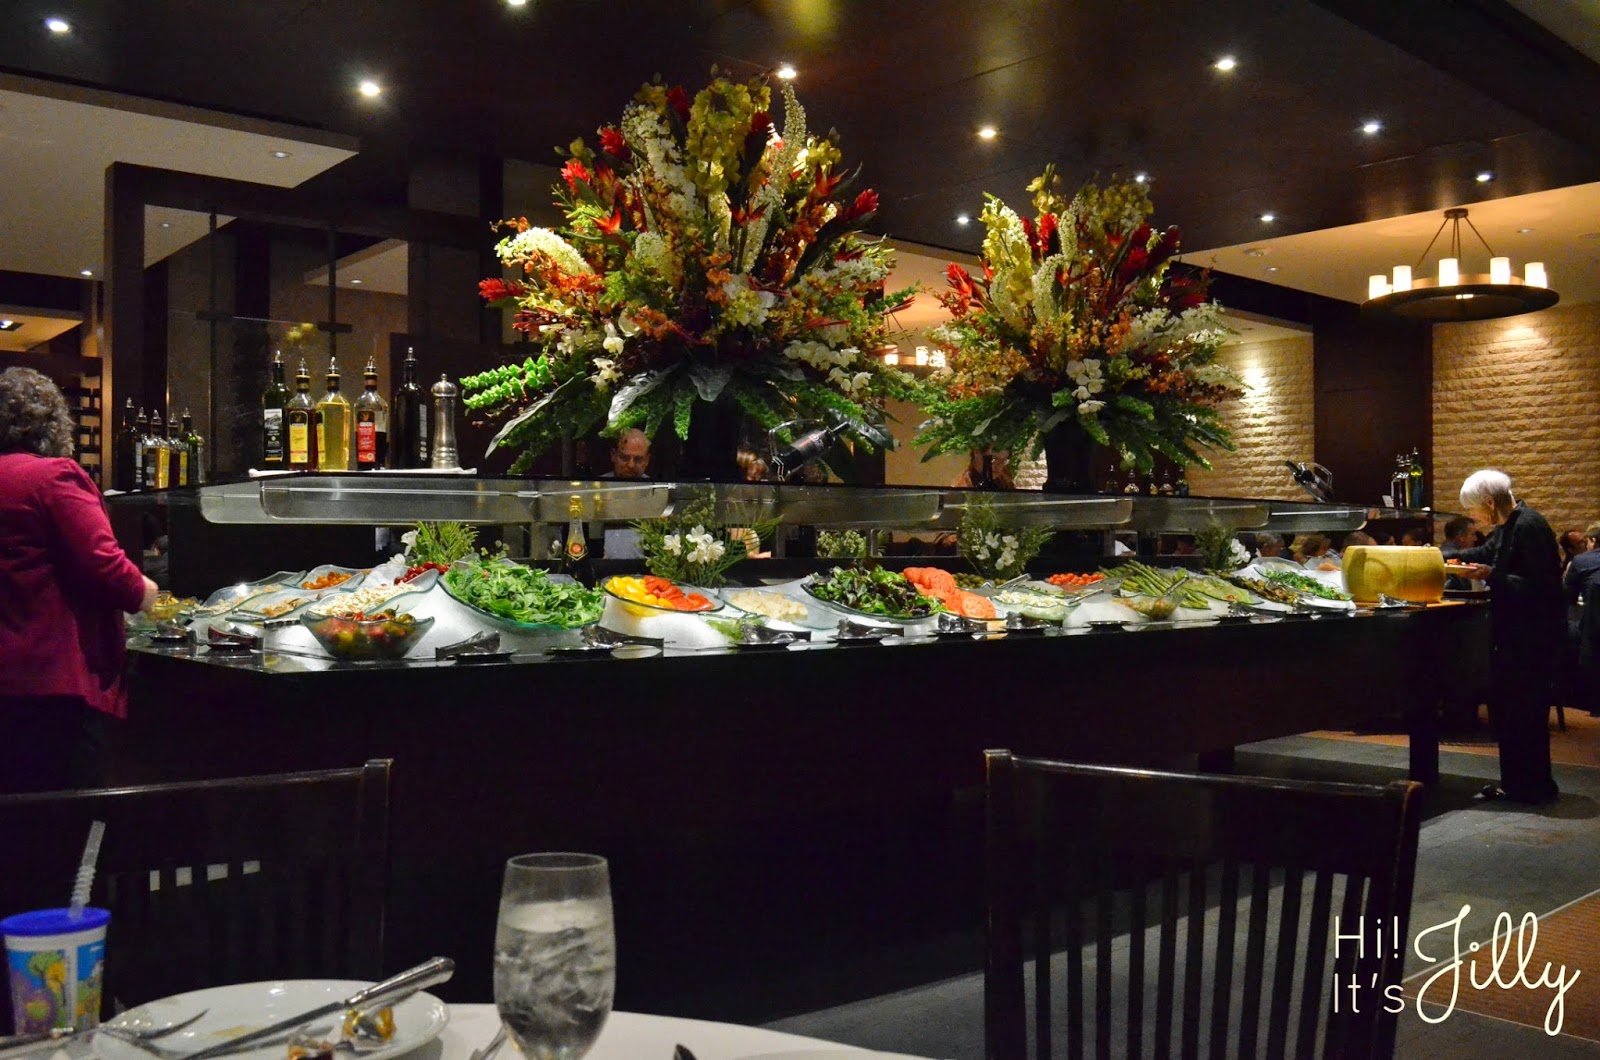 Fogo de Chao Brazilian Steakhouse. A wonderful and delicious dining experience! #restaurant #brazilian #fogodechao